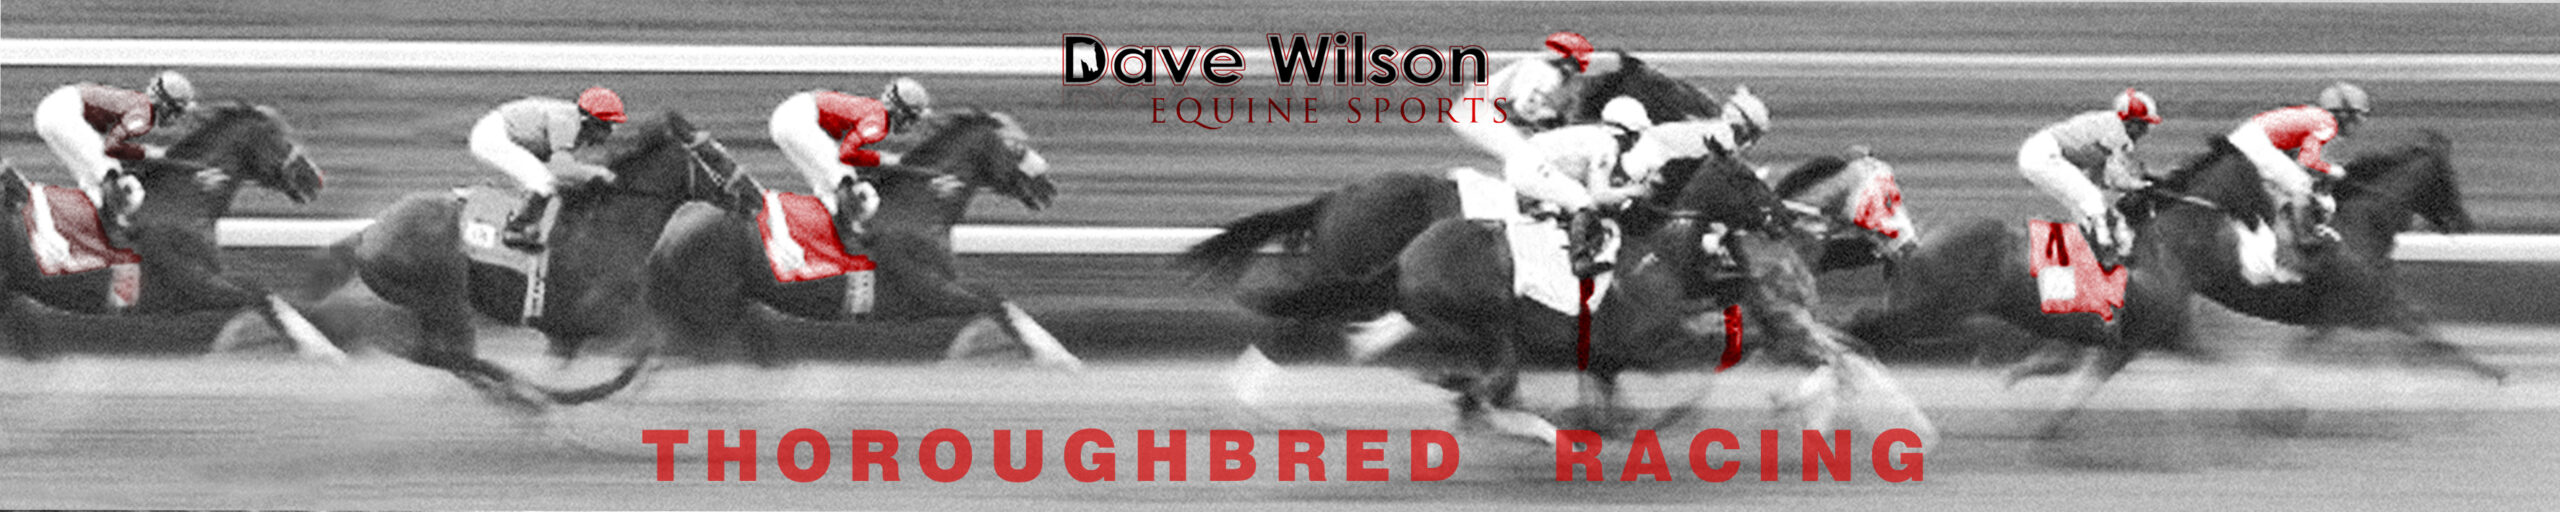 BRIDLES & REINS Archives - Dave Wilson Equine SportsDave Wilson Equine  Sports